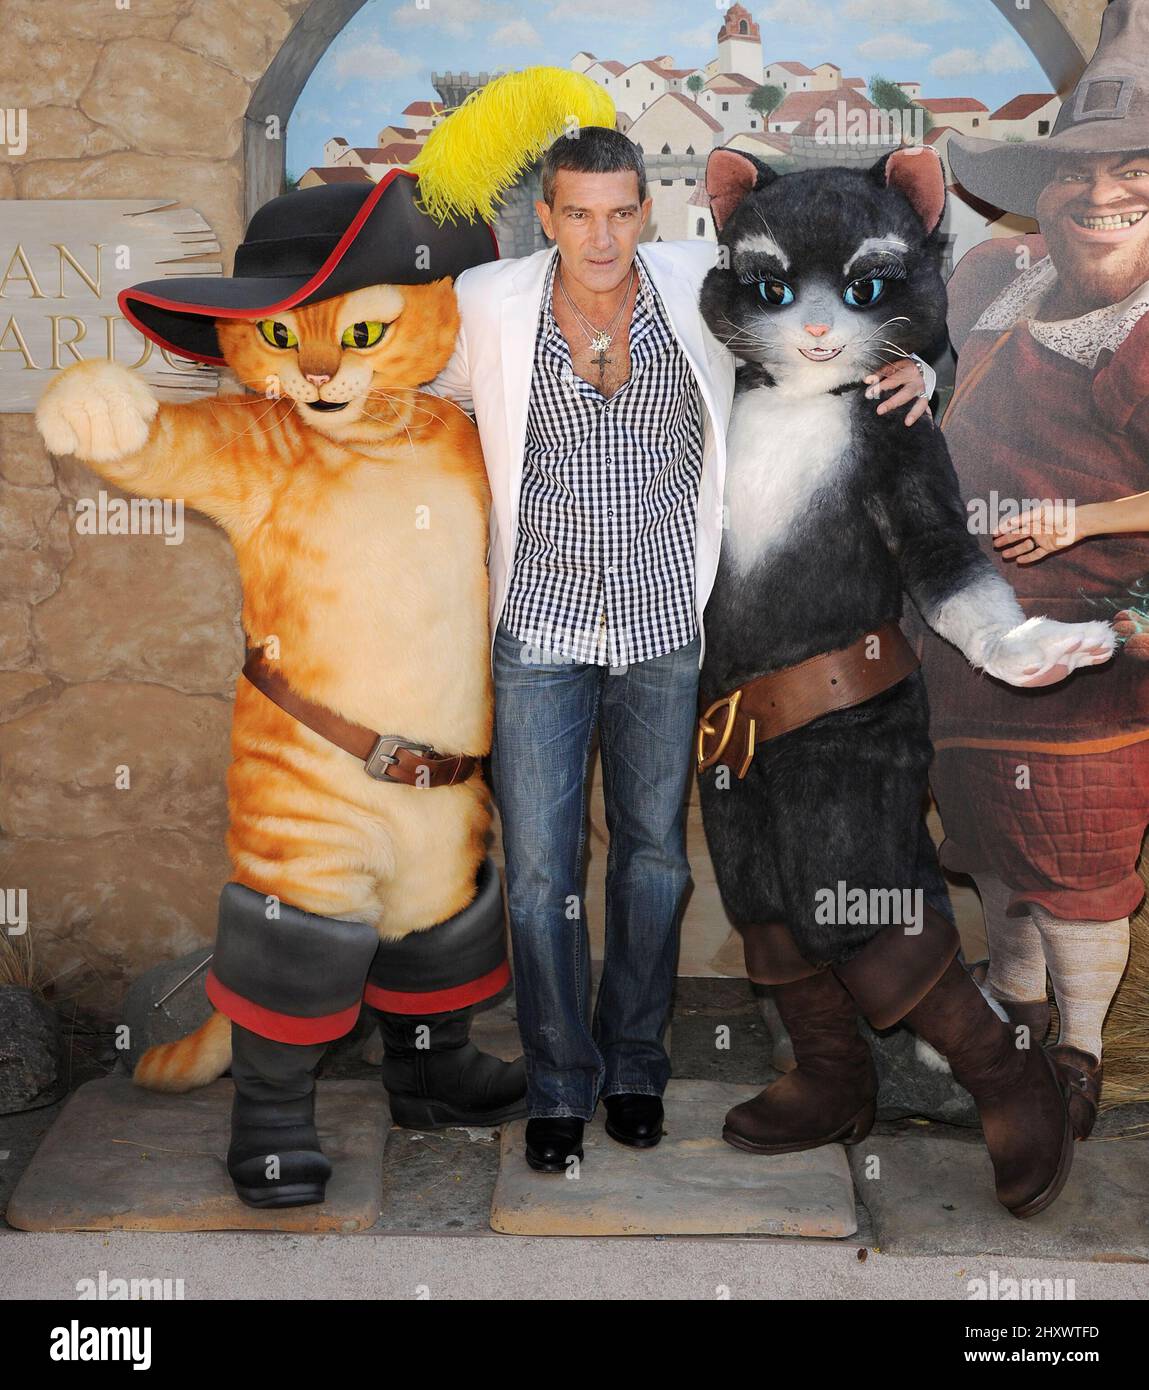 Antonio Banderas during the 'Puss In Boots' Los Angeles Premiere held at the Regency Village Theatre, California Stock Photo